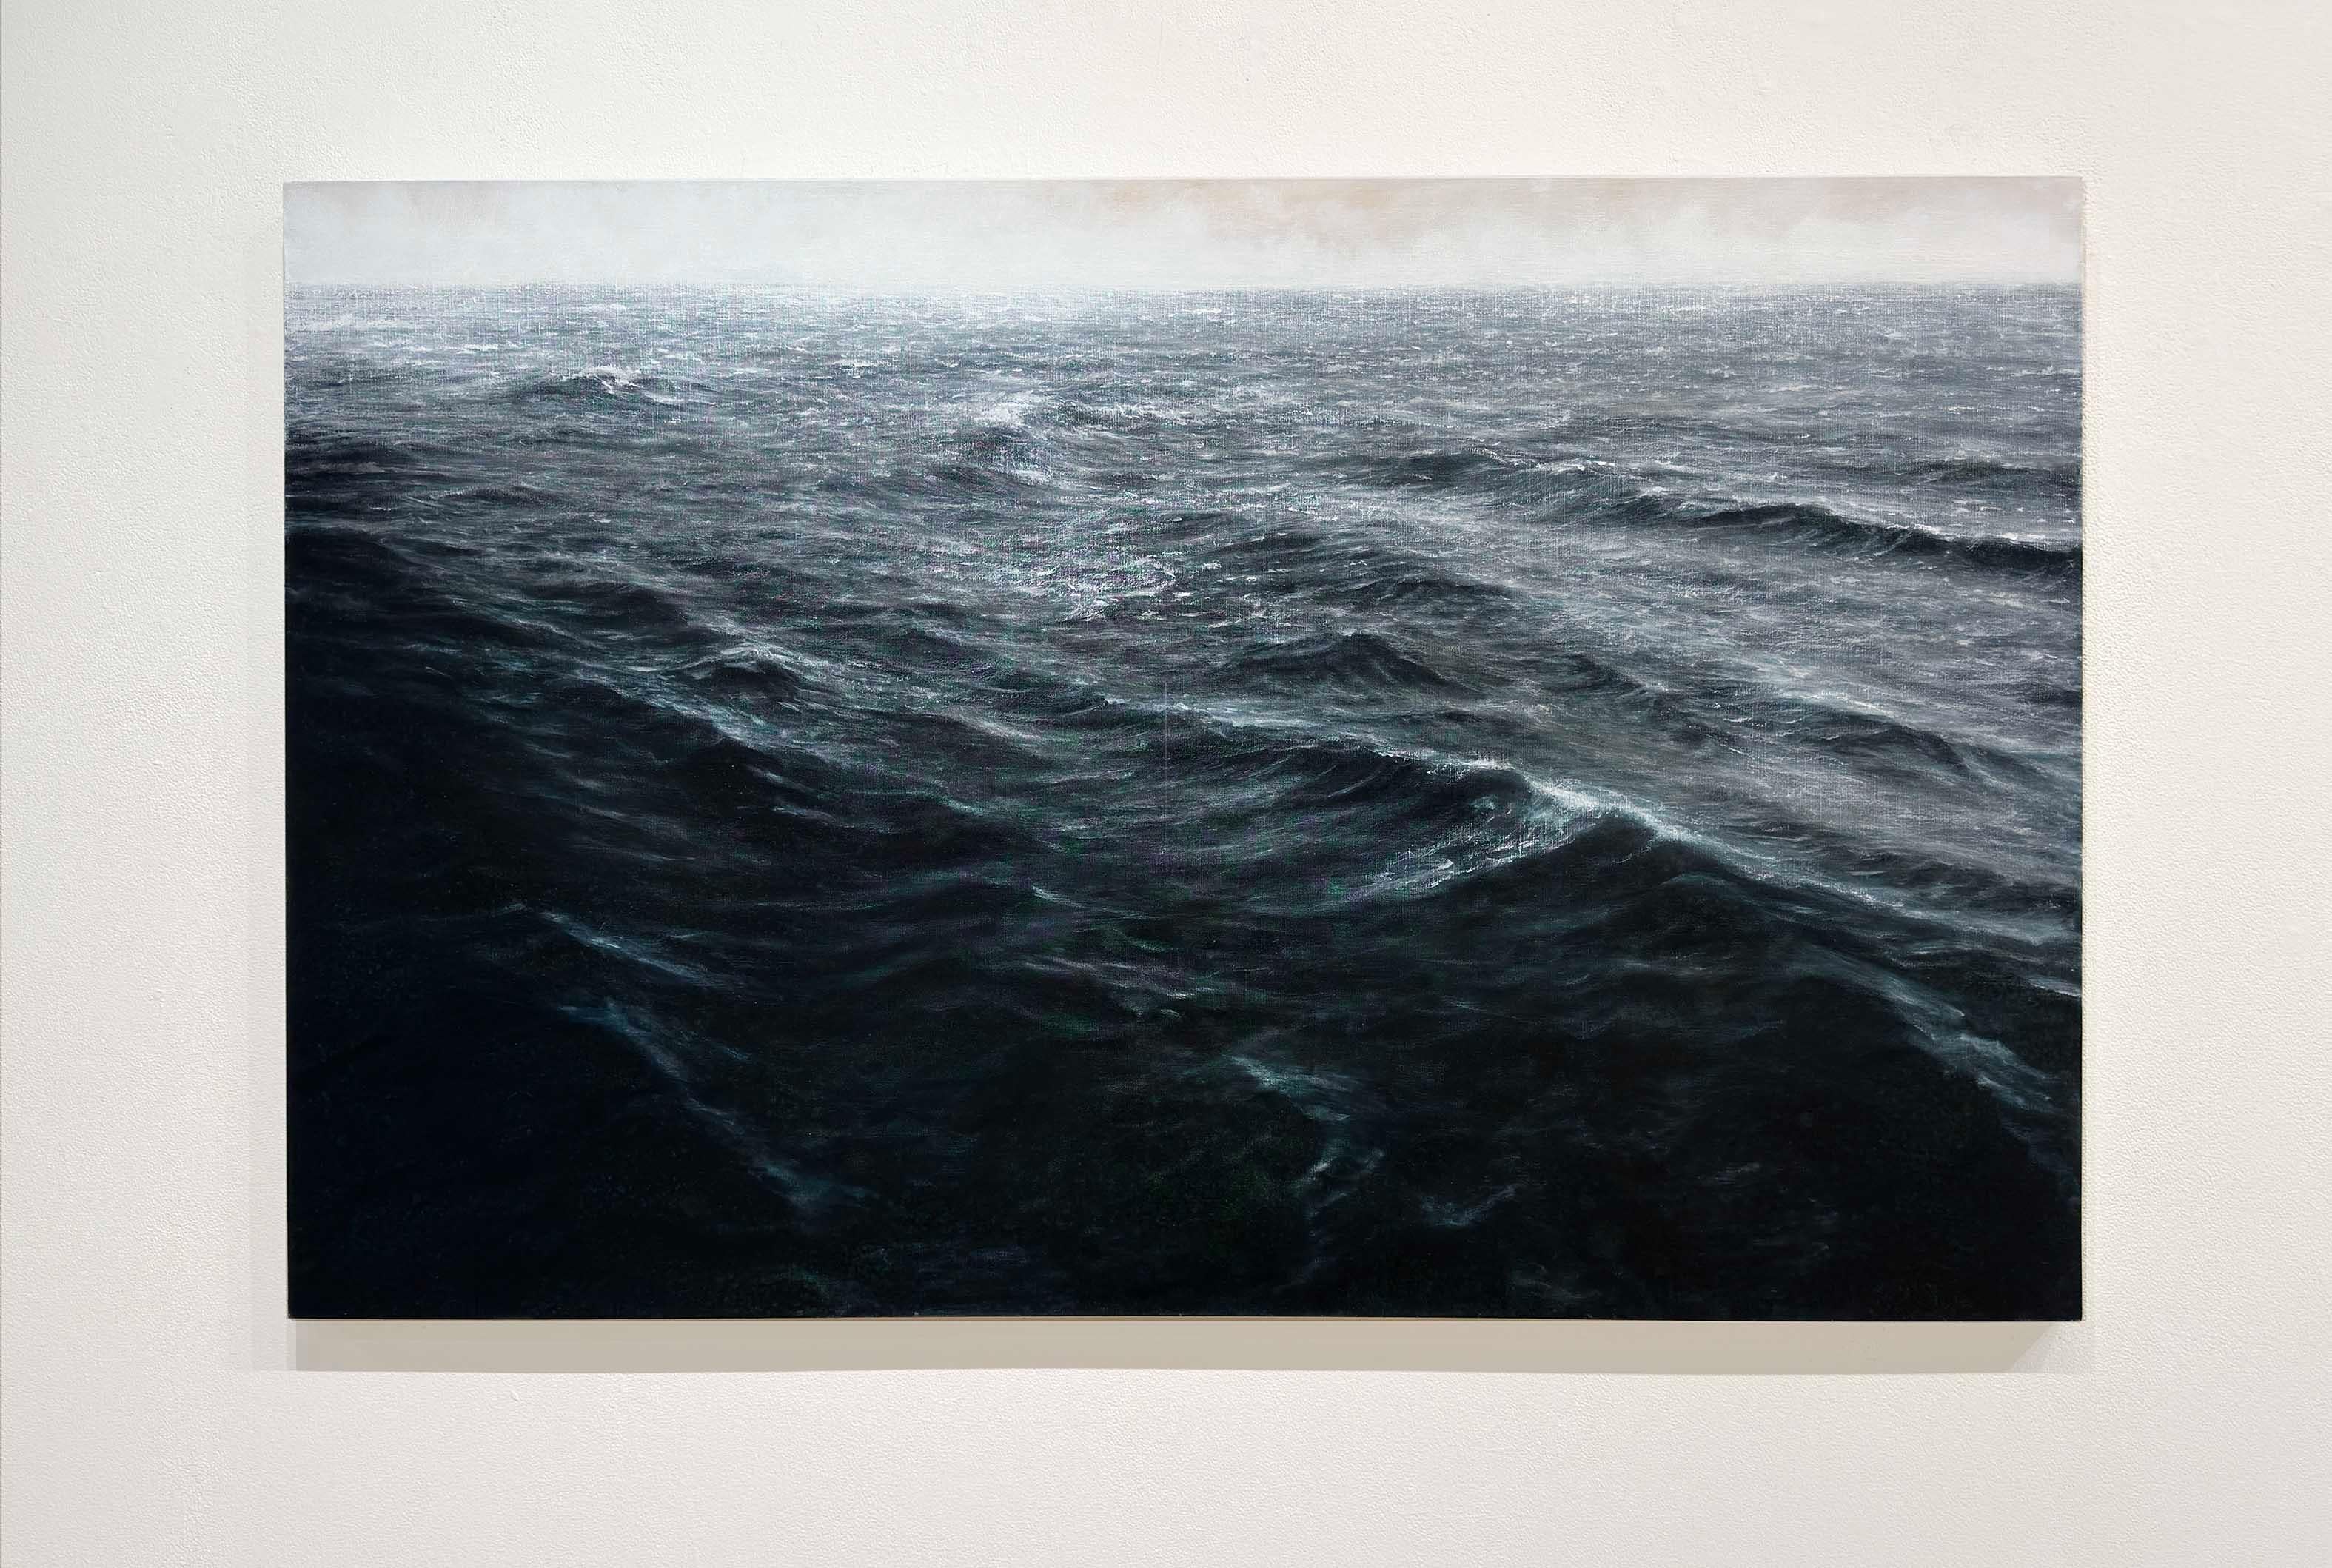 ATLANTIC SWELL #17 - Contemporary / Photorealism / Waterscape / Sea - Painting by Lisa Lebofsky